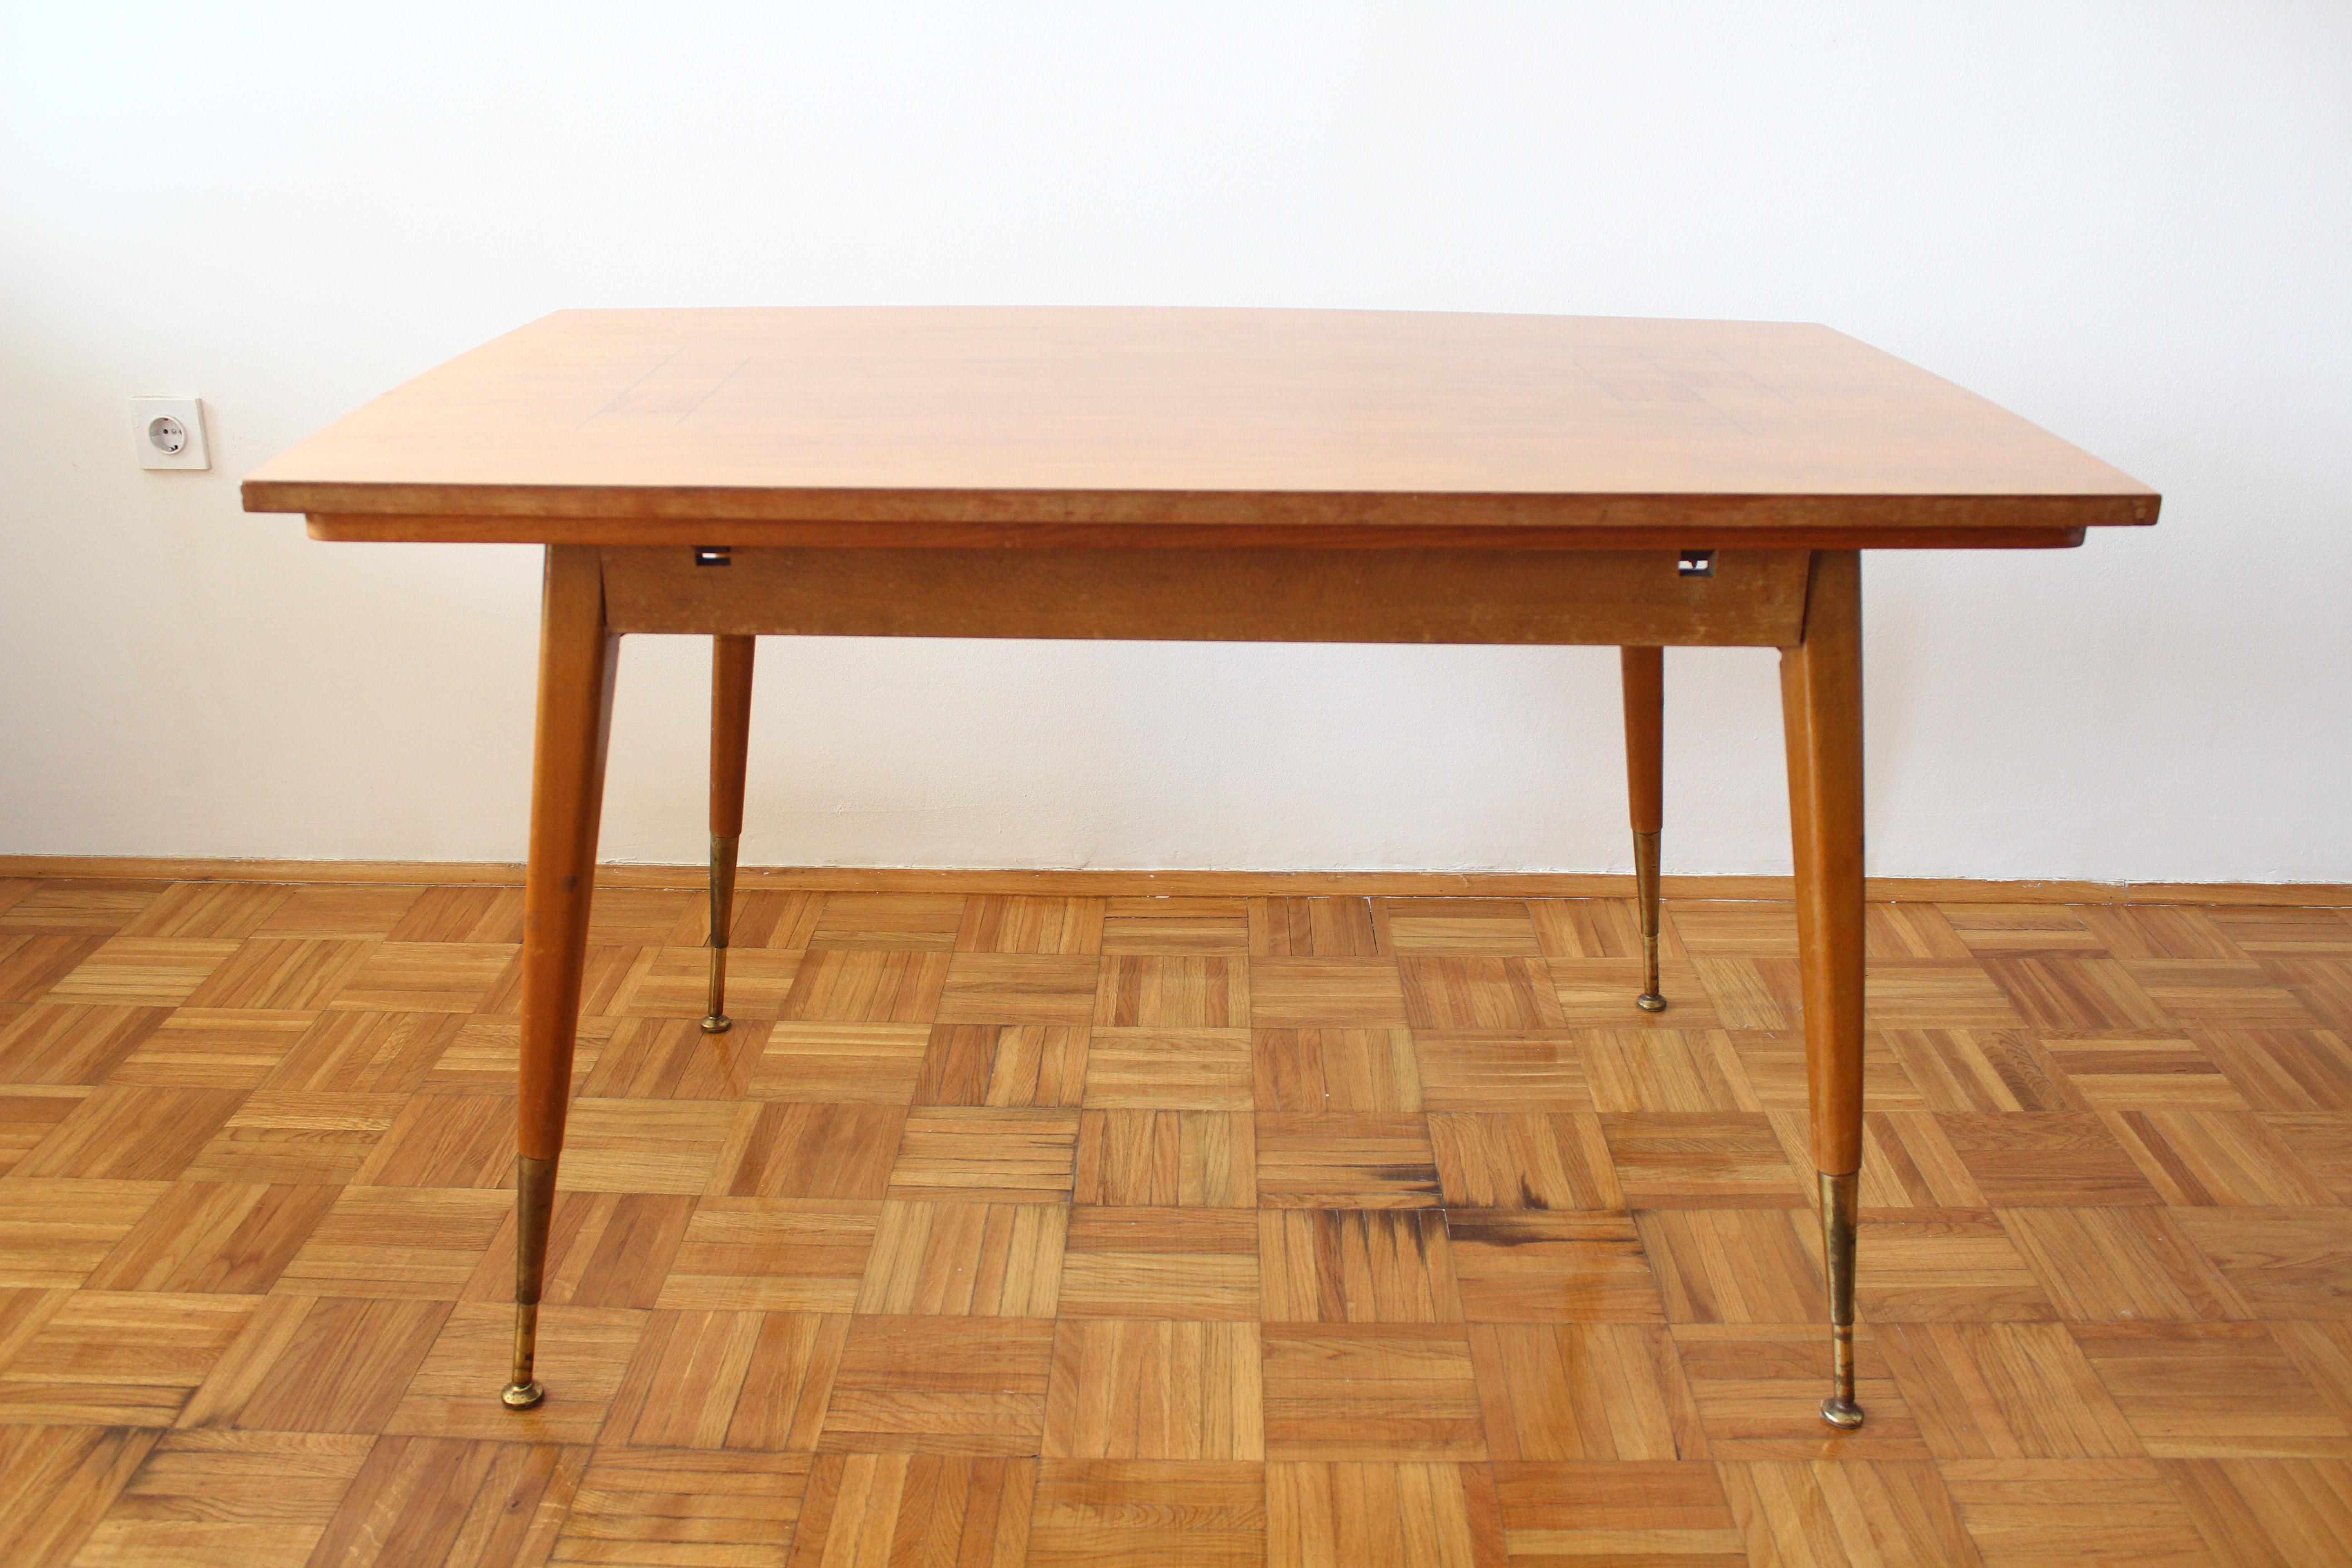 Italian Adjustable dining table 1950s which can be adjusted in height and width